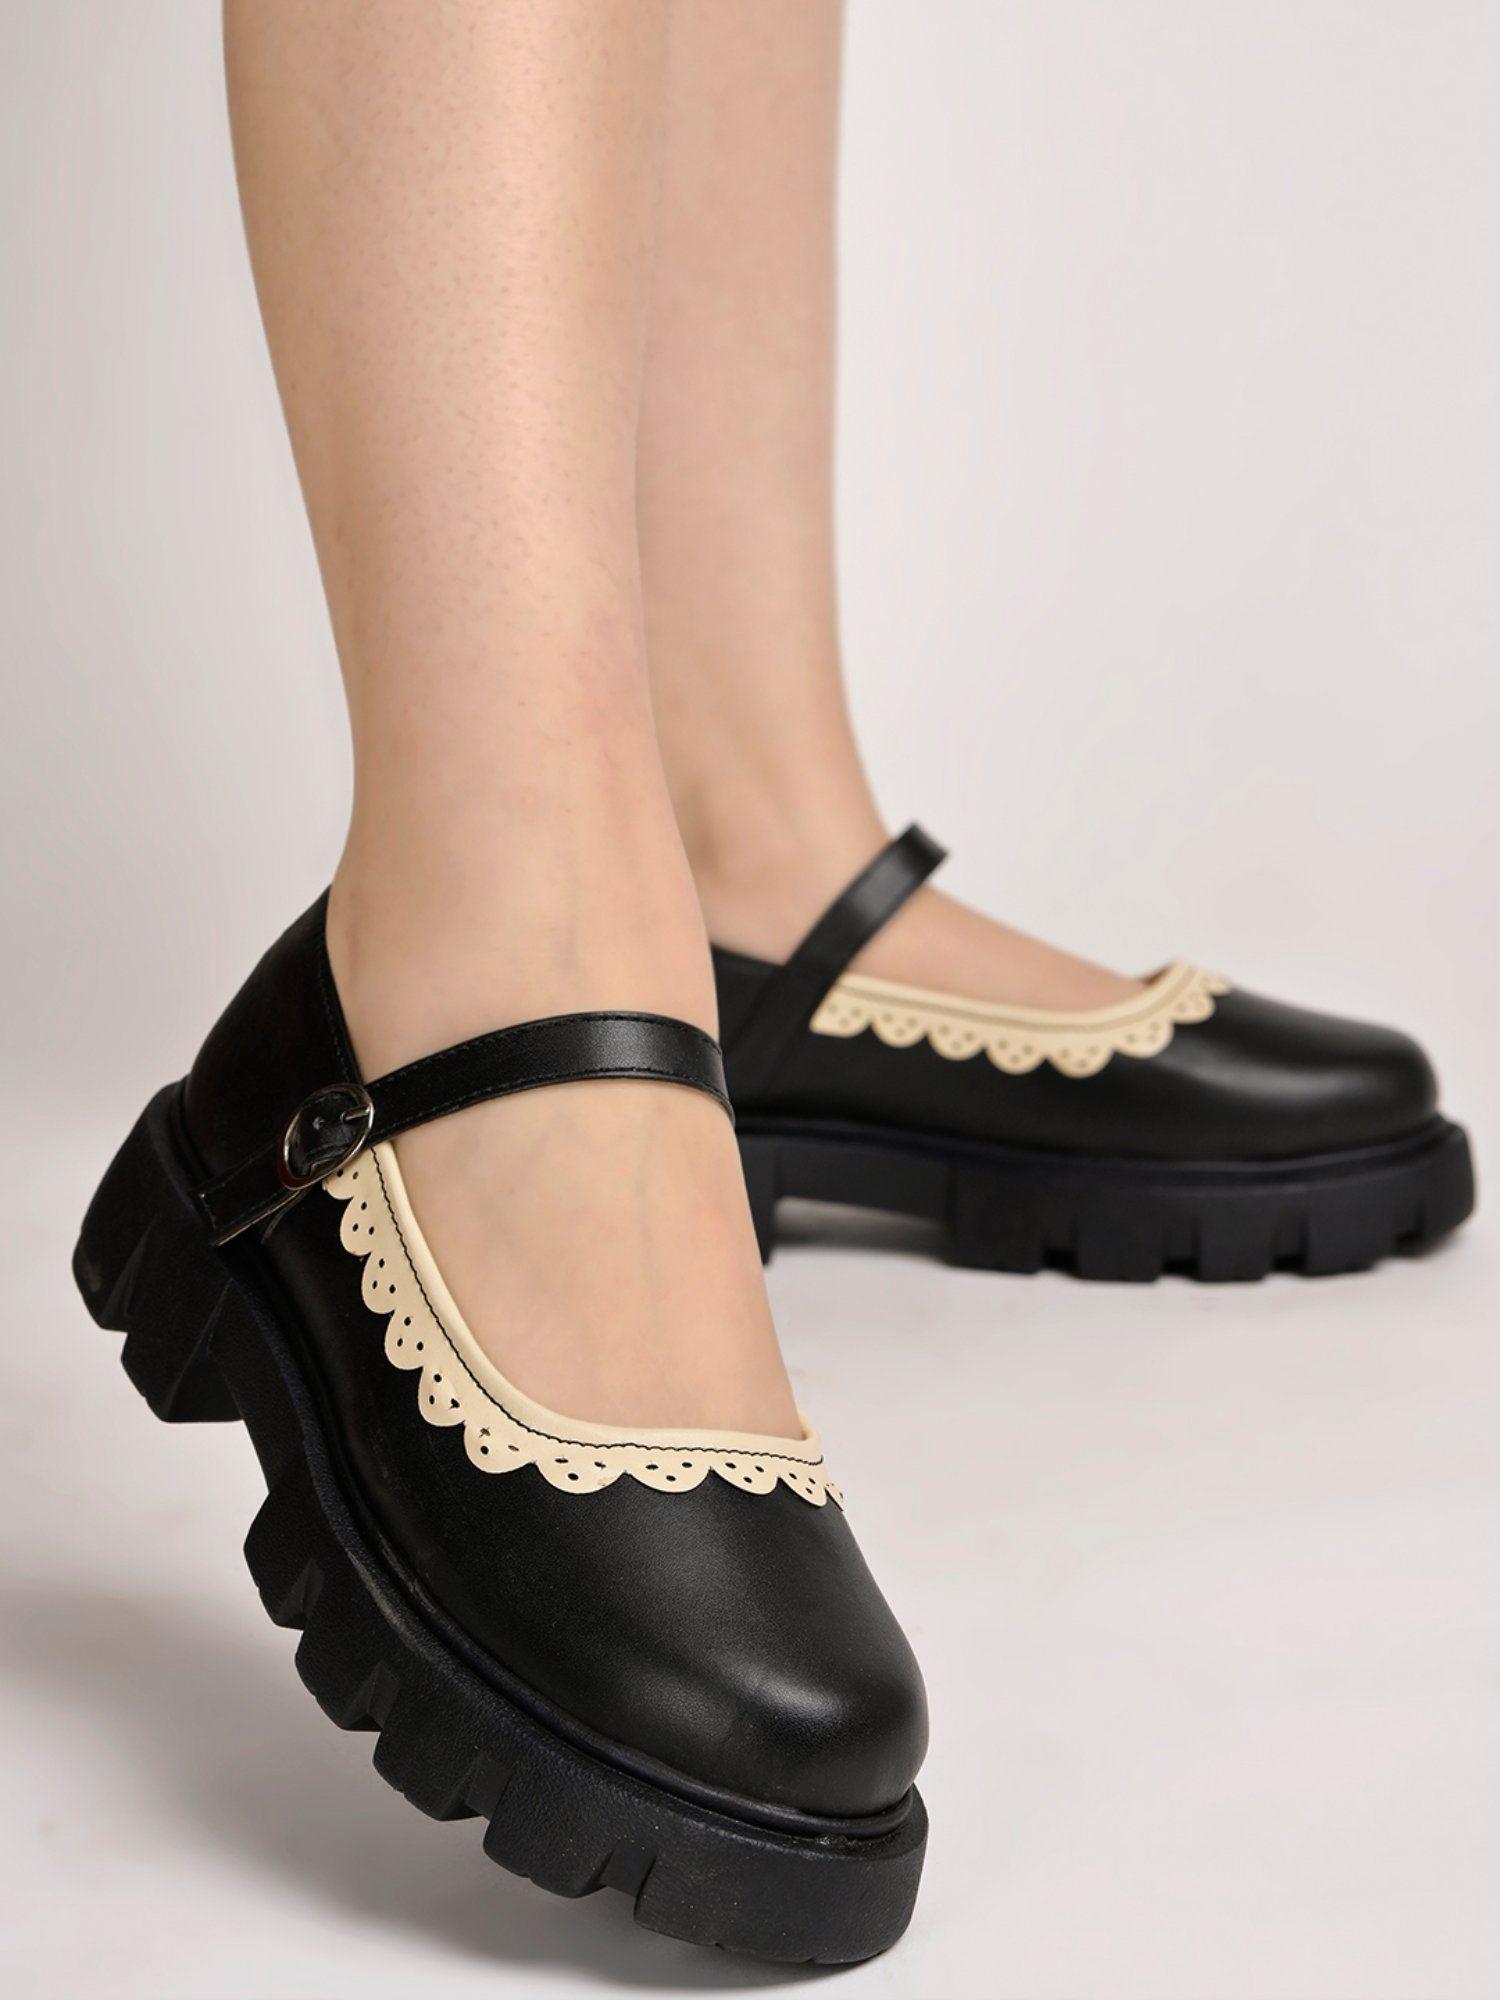 round toe black mary janes bellies for women & girls